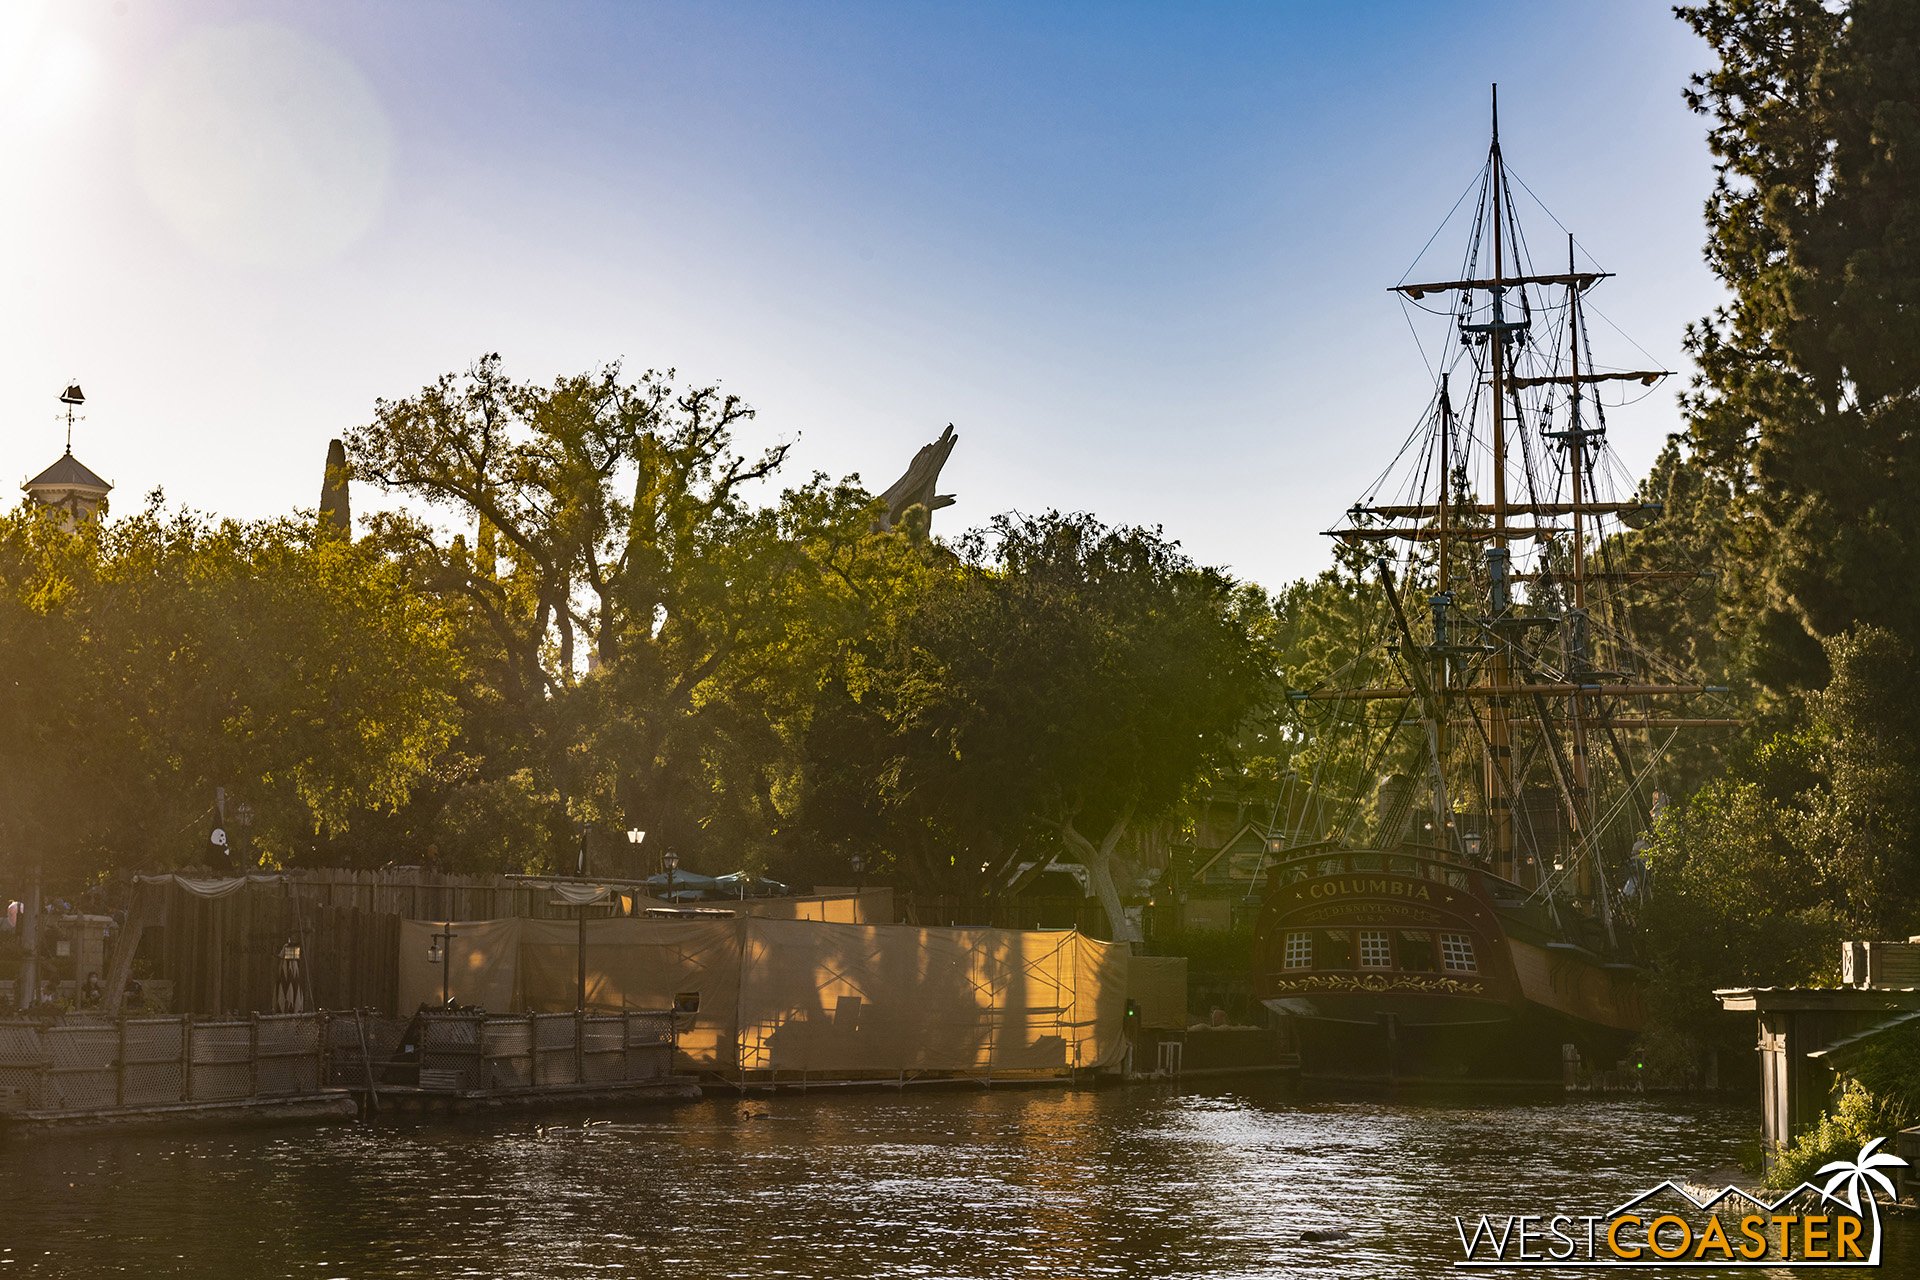  This was the scene along this part of the Rivers of America last September. 